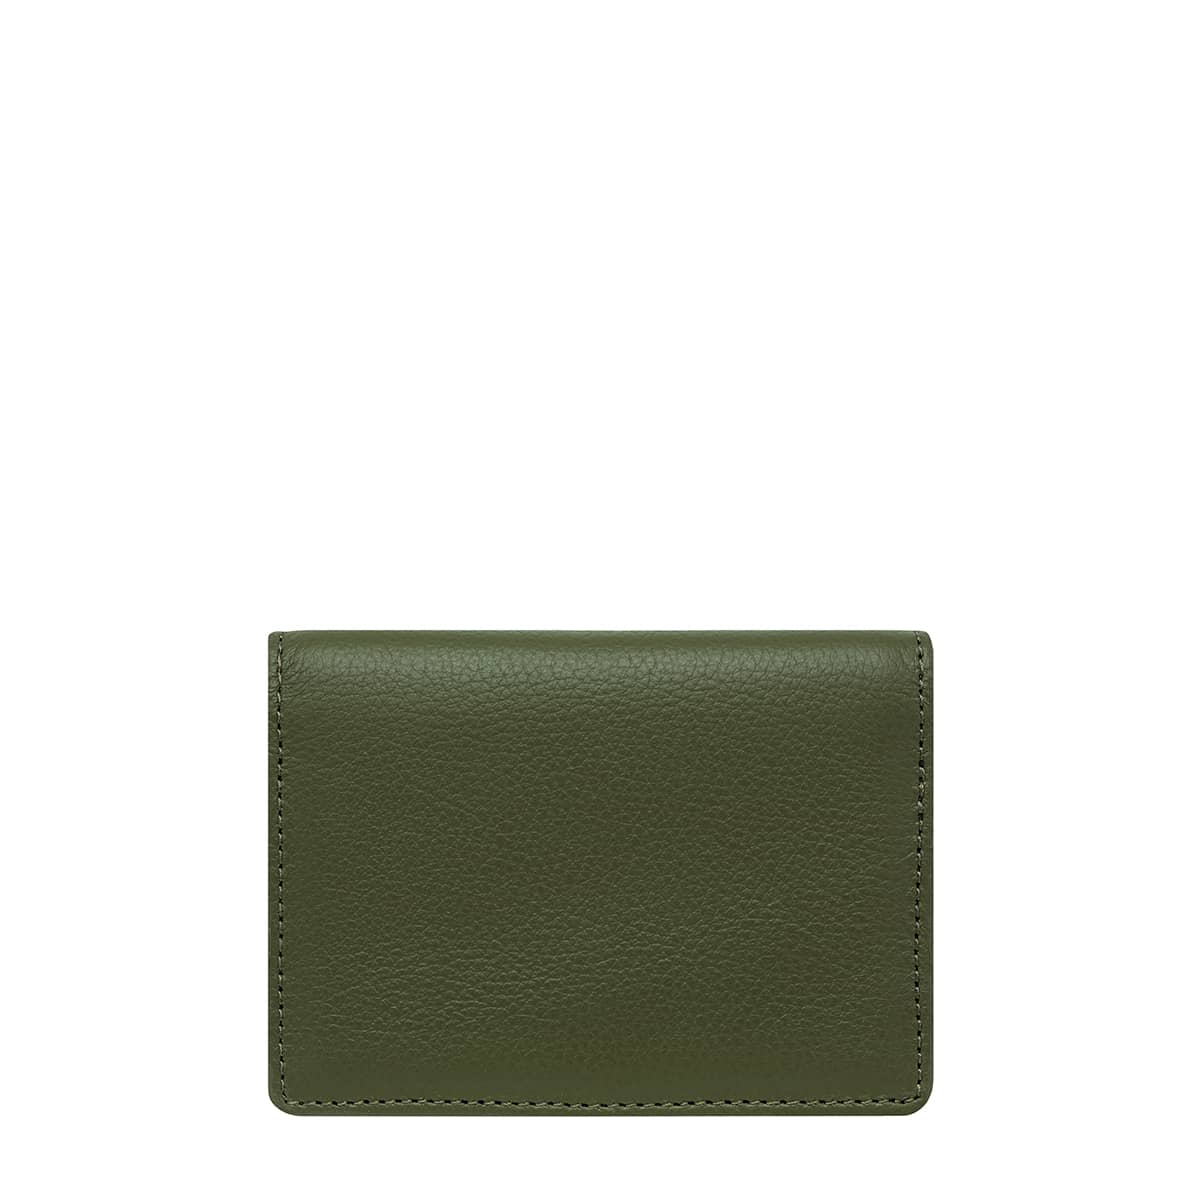 It's particularly important to keep your cool when you find yourself in a tight situation. The 'Easy Does It' wallet is perfect for just such a squeeze. Made to carry a stack of cards and a few folded notes, yet slim enough to throw in your back pocket.  Soft shrunken pebble leather 6 card slots (slots can be doubled up to fit 12) 2 open slots to stash folded banknotes and receipts 11cm x 8cm x 1.5cm Comes in a Status Anxiety box packaging